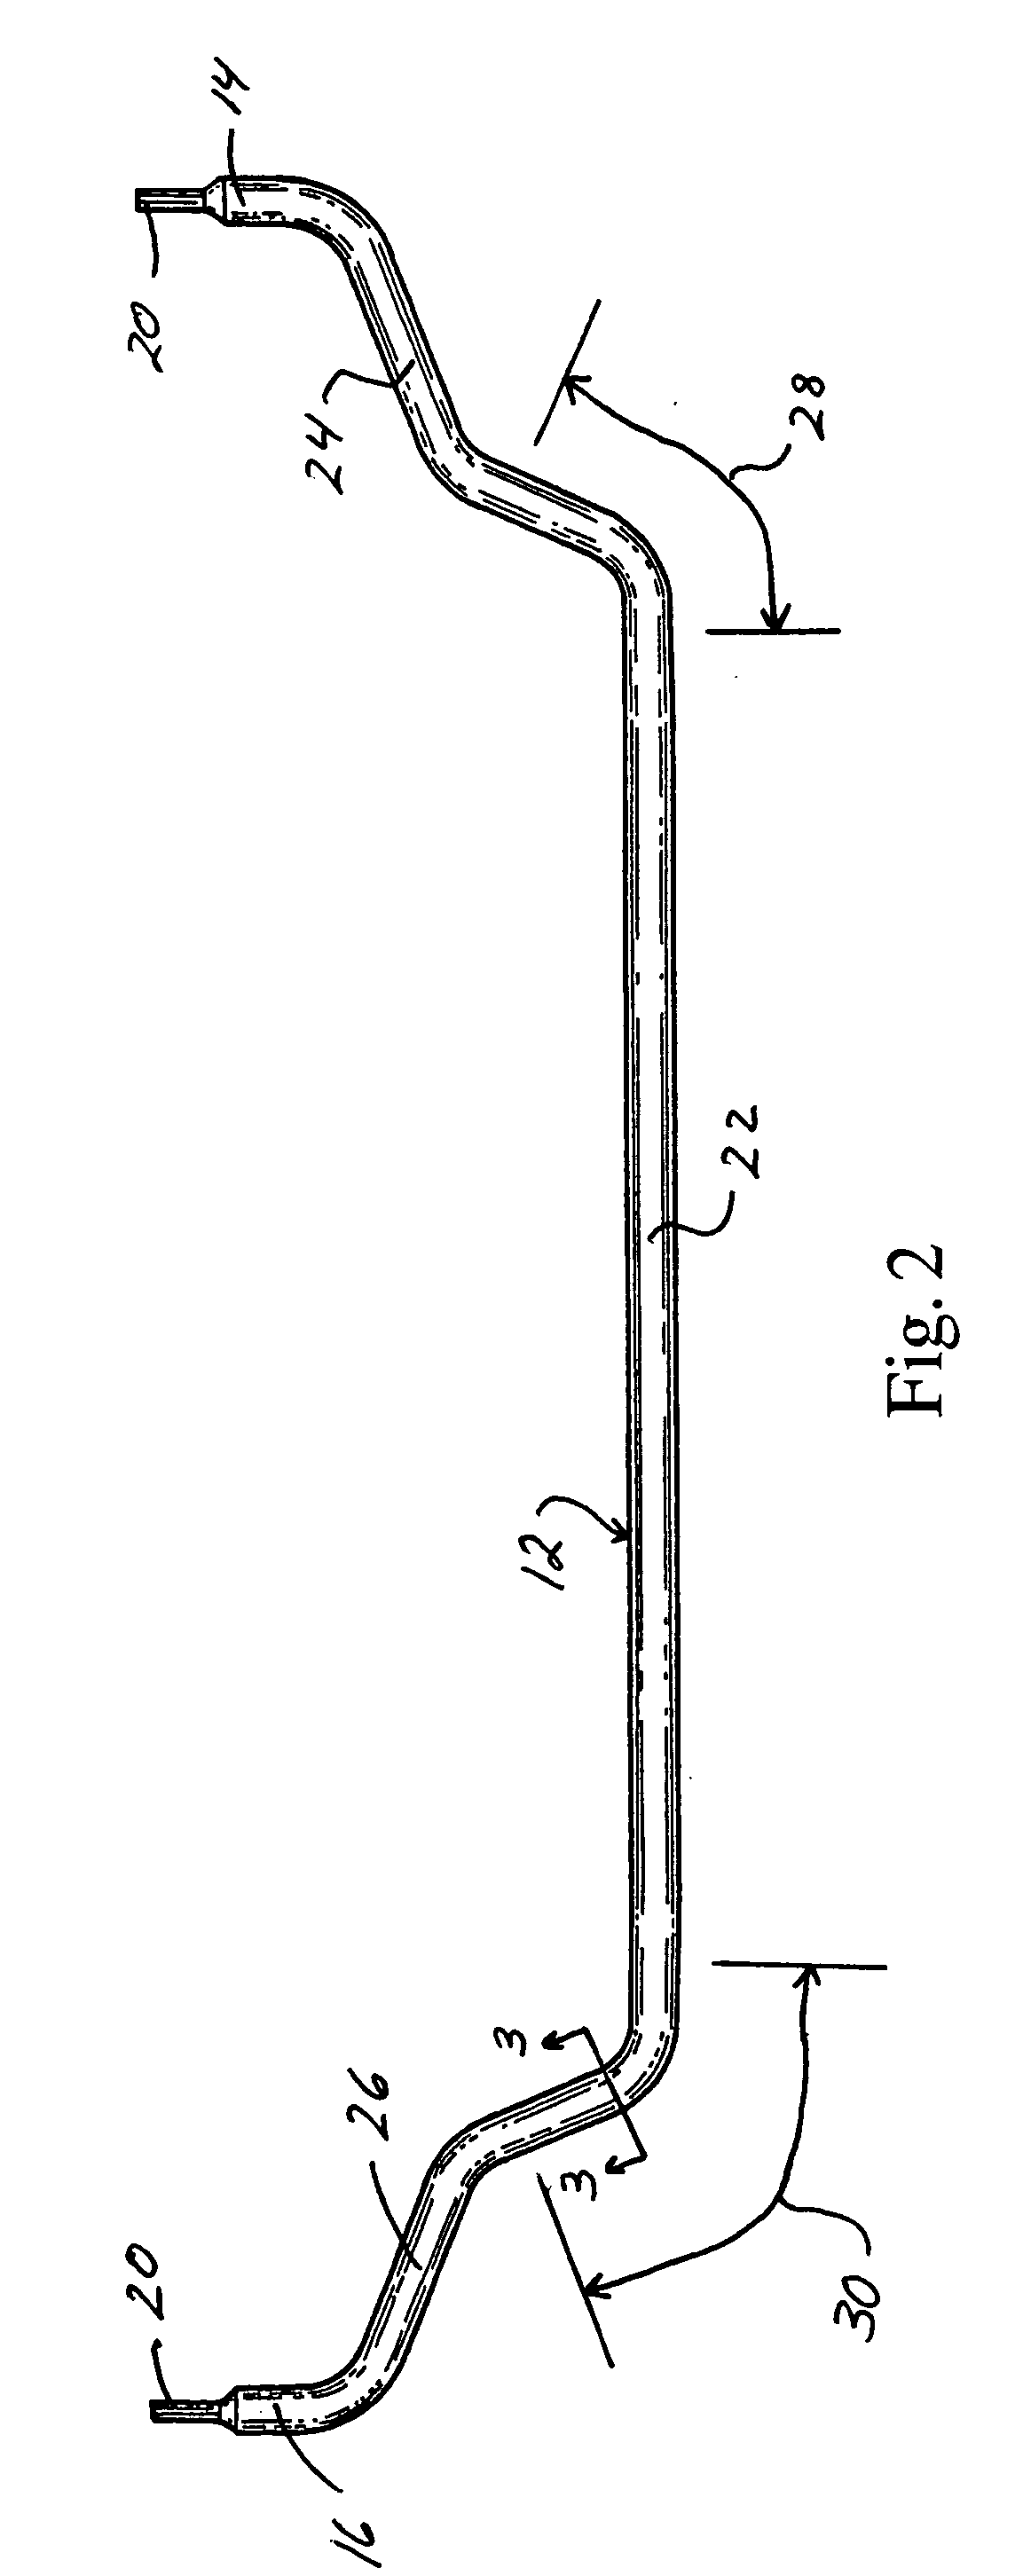 Suspension component having localized material strengthening